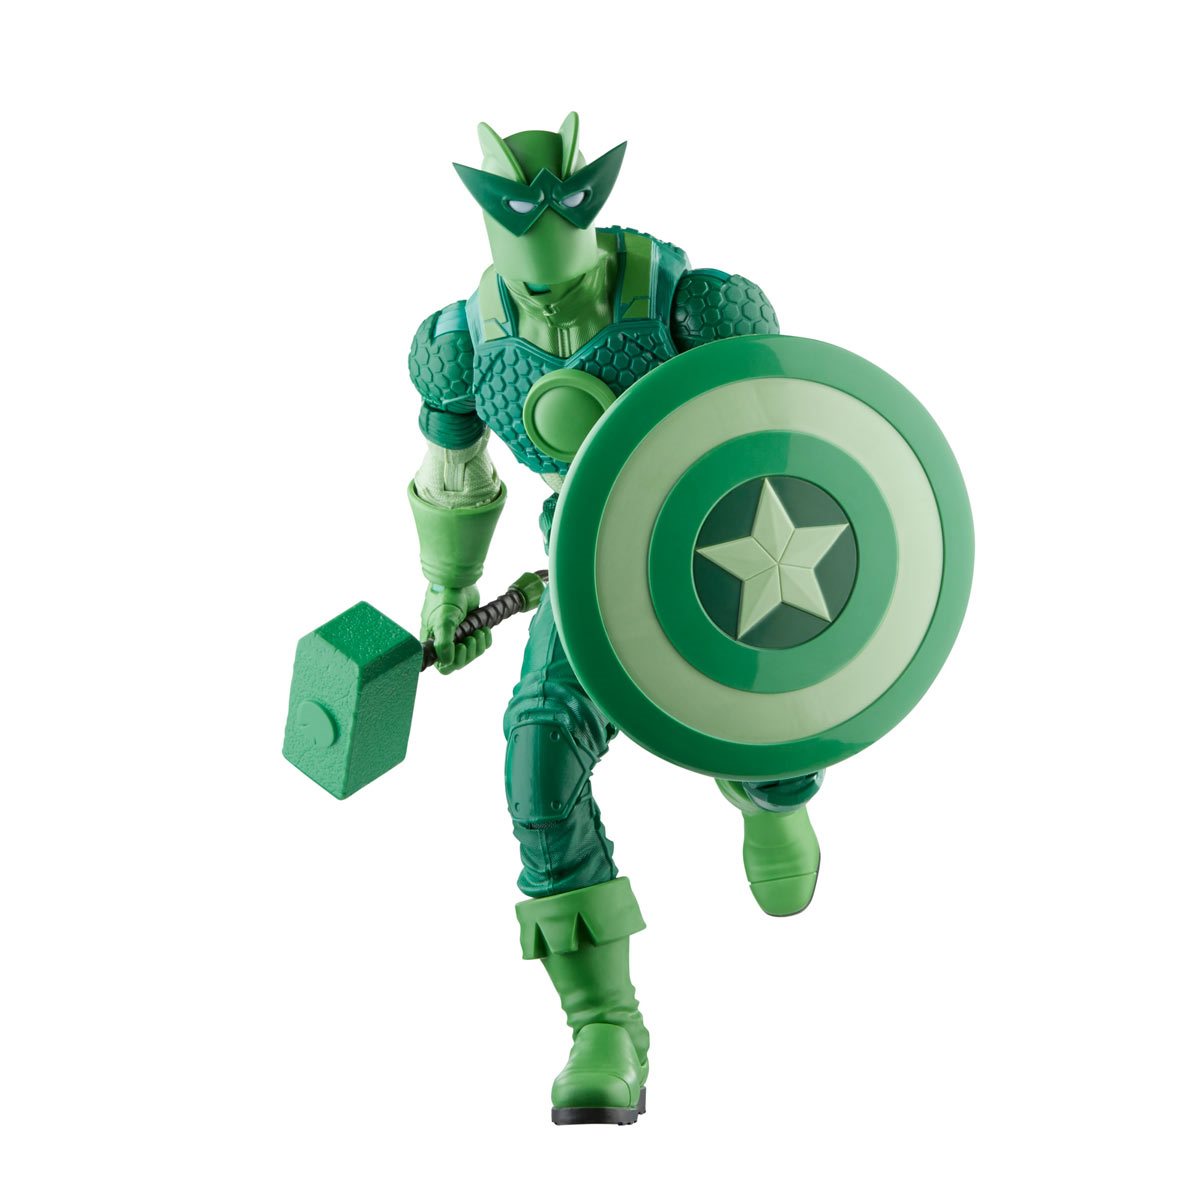 Super-Adaptoid running pose with hammer and shield - Heretoserveyou